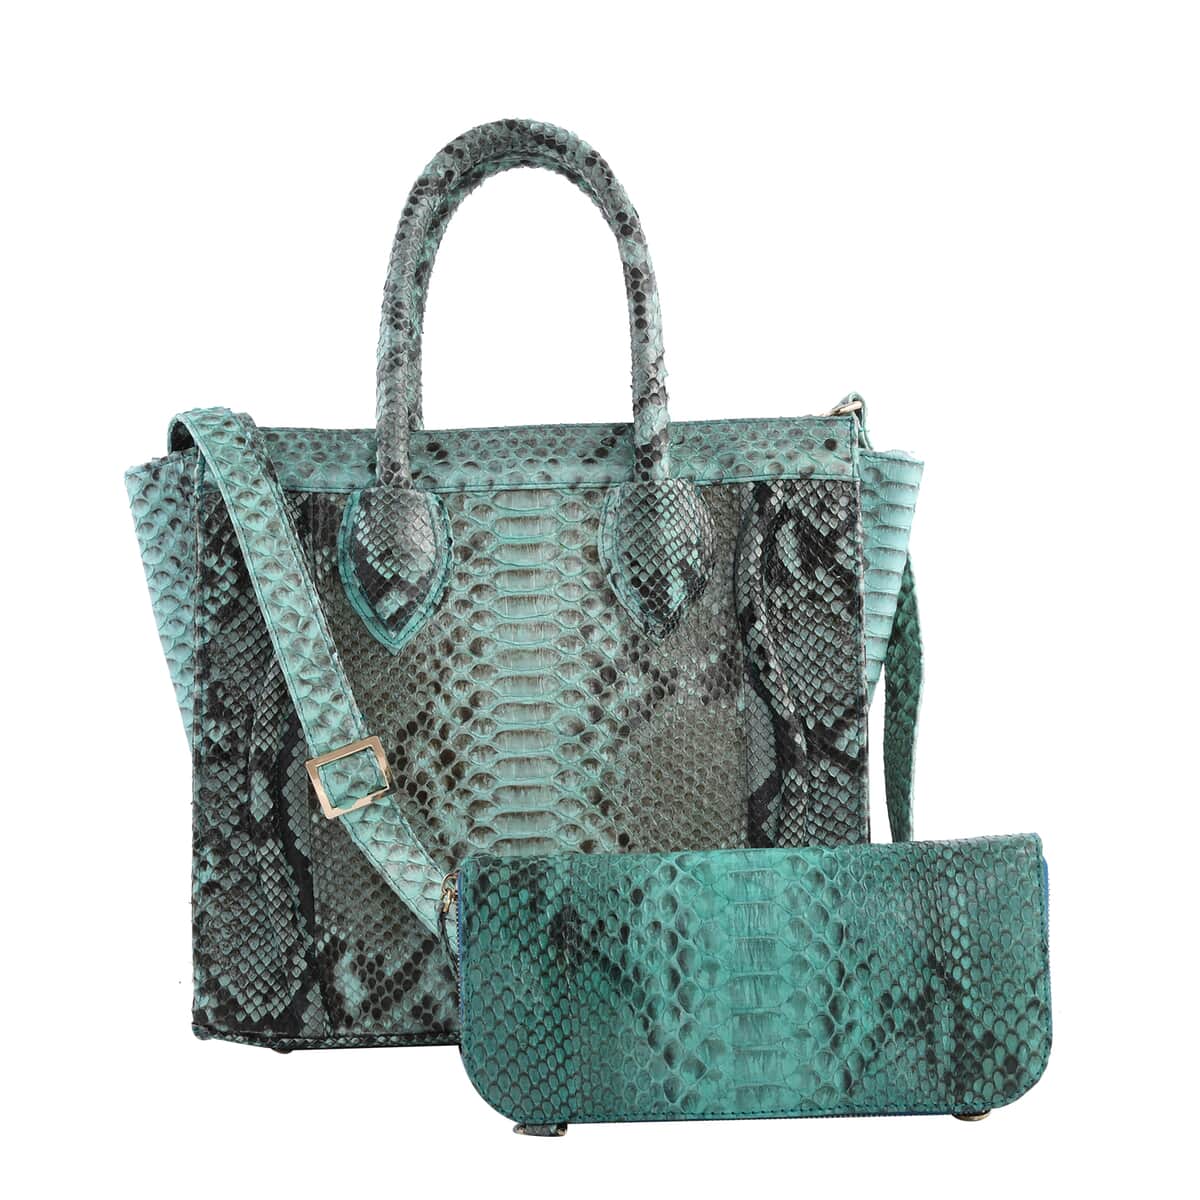 The Grand Pelle Handcrafted Turquoise Color Genuine Python Leather Tote Bag for Women with Wallet, Designer Tote Bags, Ladies Purse, Shoulder Handbags, Leather Wallet image number 0